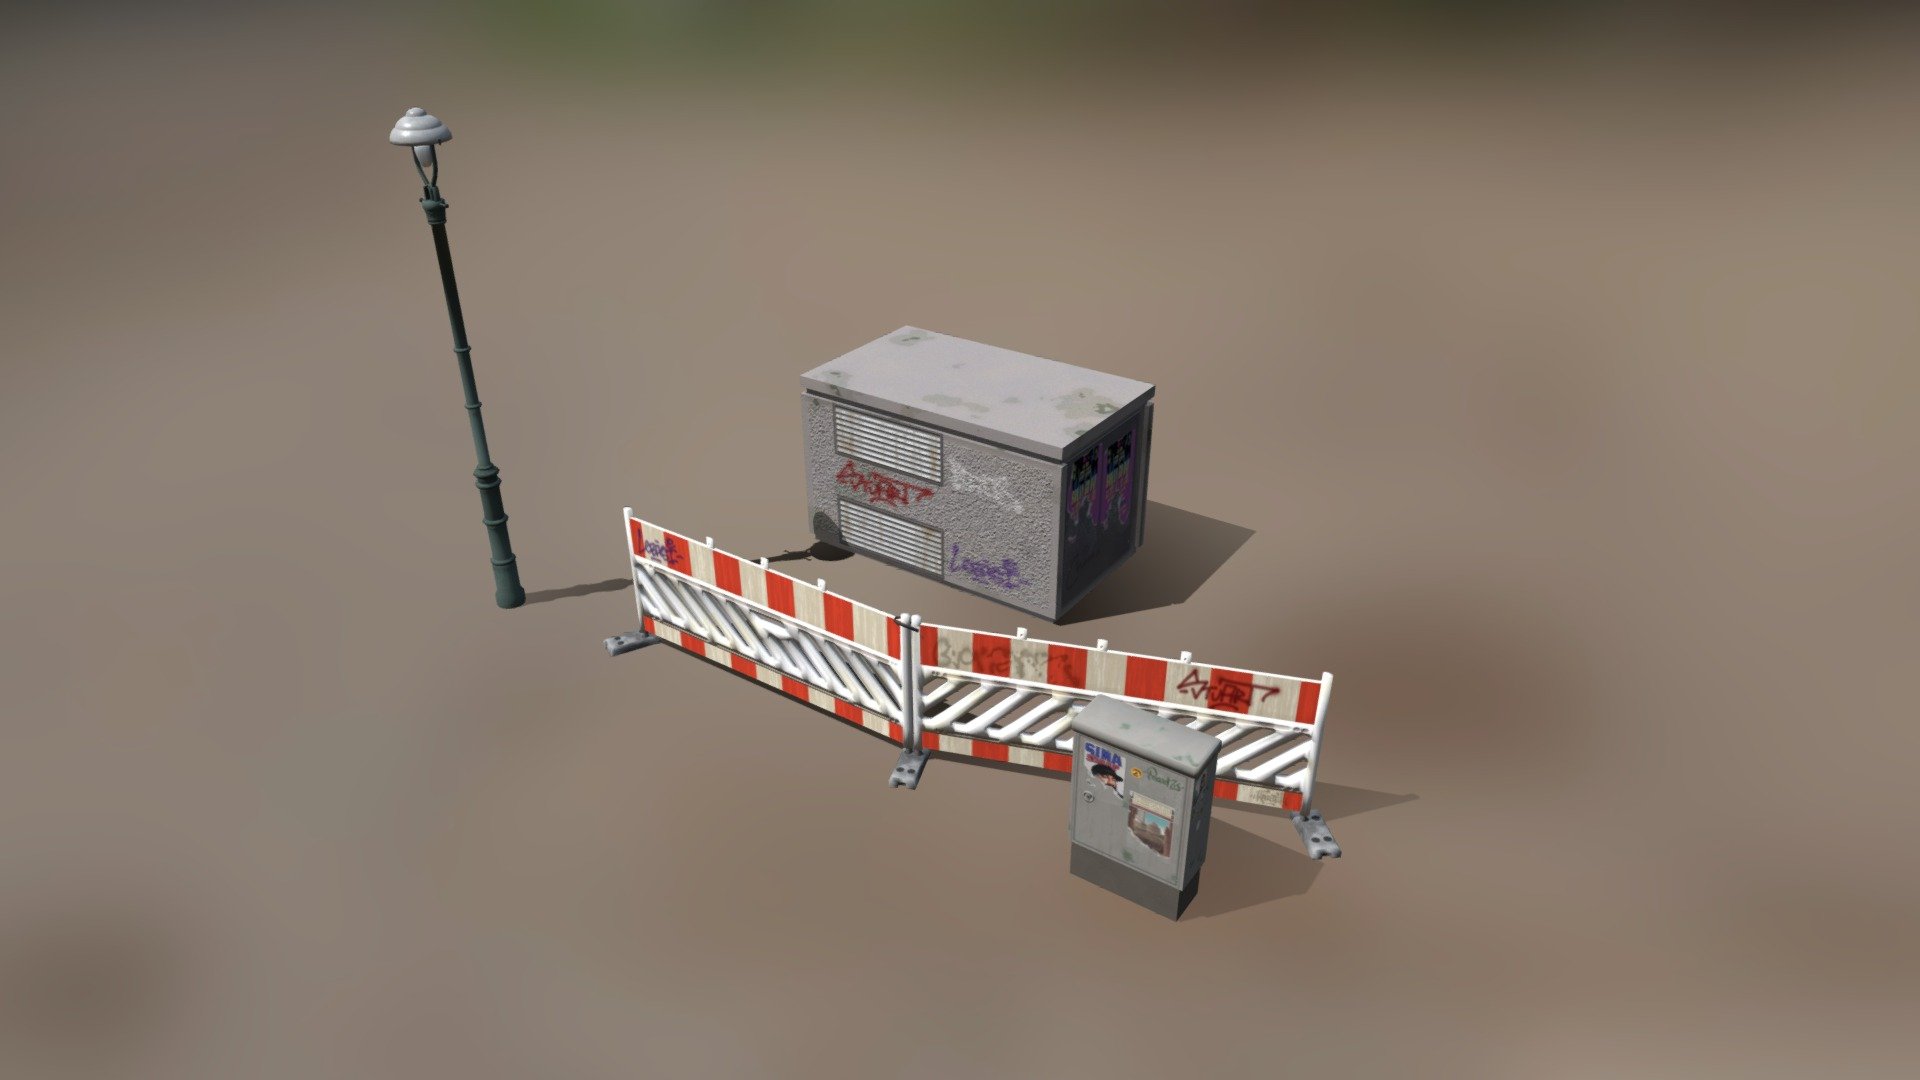 Models for Lowpoly Berlin street in night

Street props pack based on the city of Berlins look.
Some of the posters and stickers are made with AI. The rest of the textures are painted in Photoshop and the models are made with Blender. 




Lightpole

Electrical cabinet

Electrical box

Construction fence + foot

Let me know if there is any issues.

See also Lowpoly Berlin street props pack 2

Feel free to use it! - Lowpoly Berlin street props pack 1 - Download Free 3D model by n-malmberg 3d model